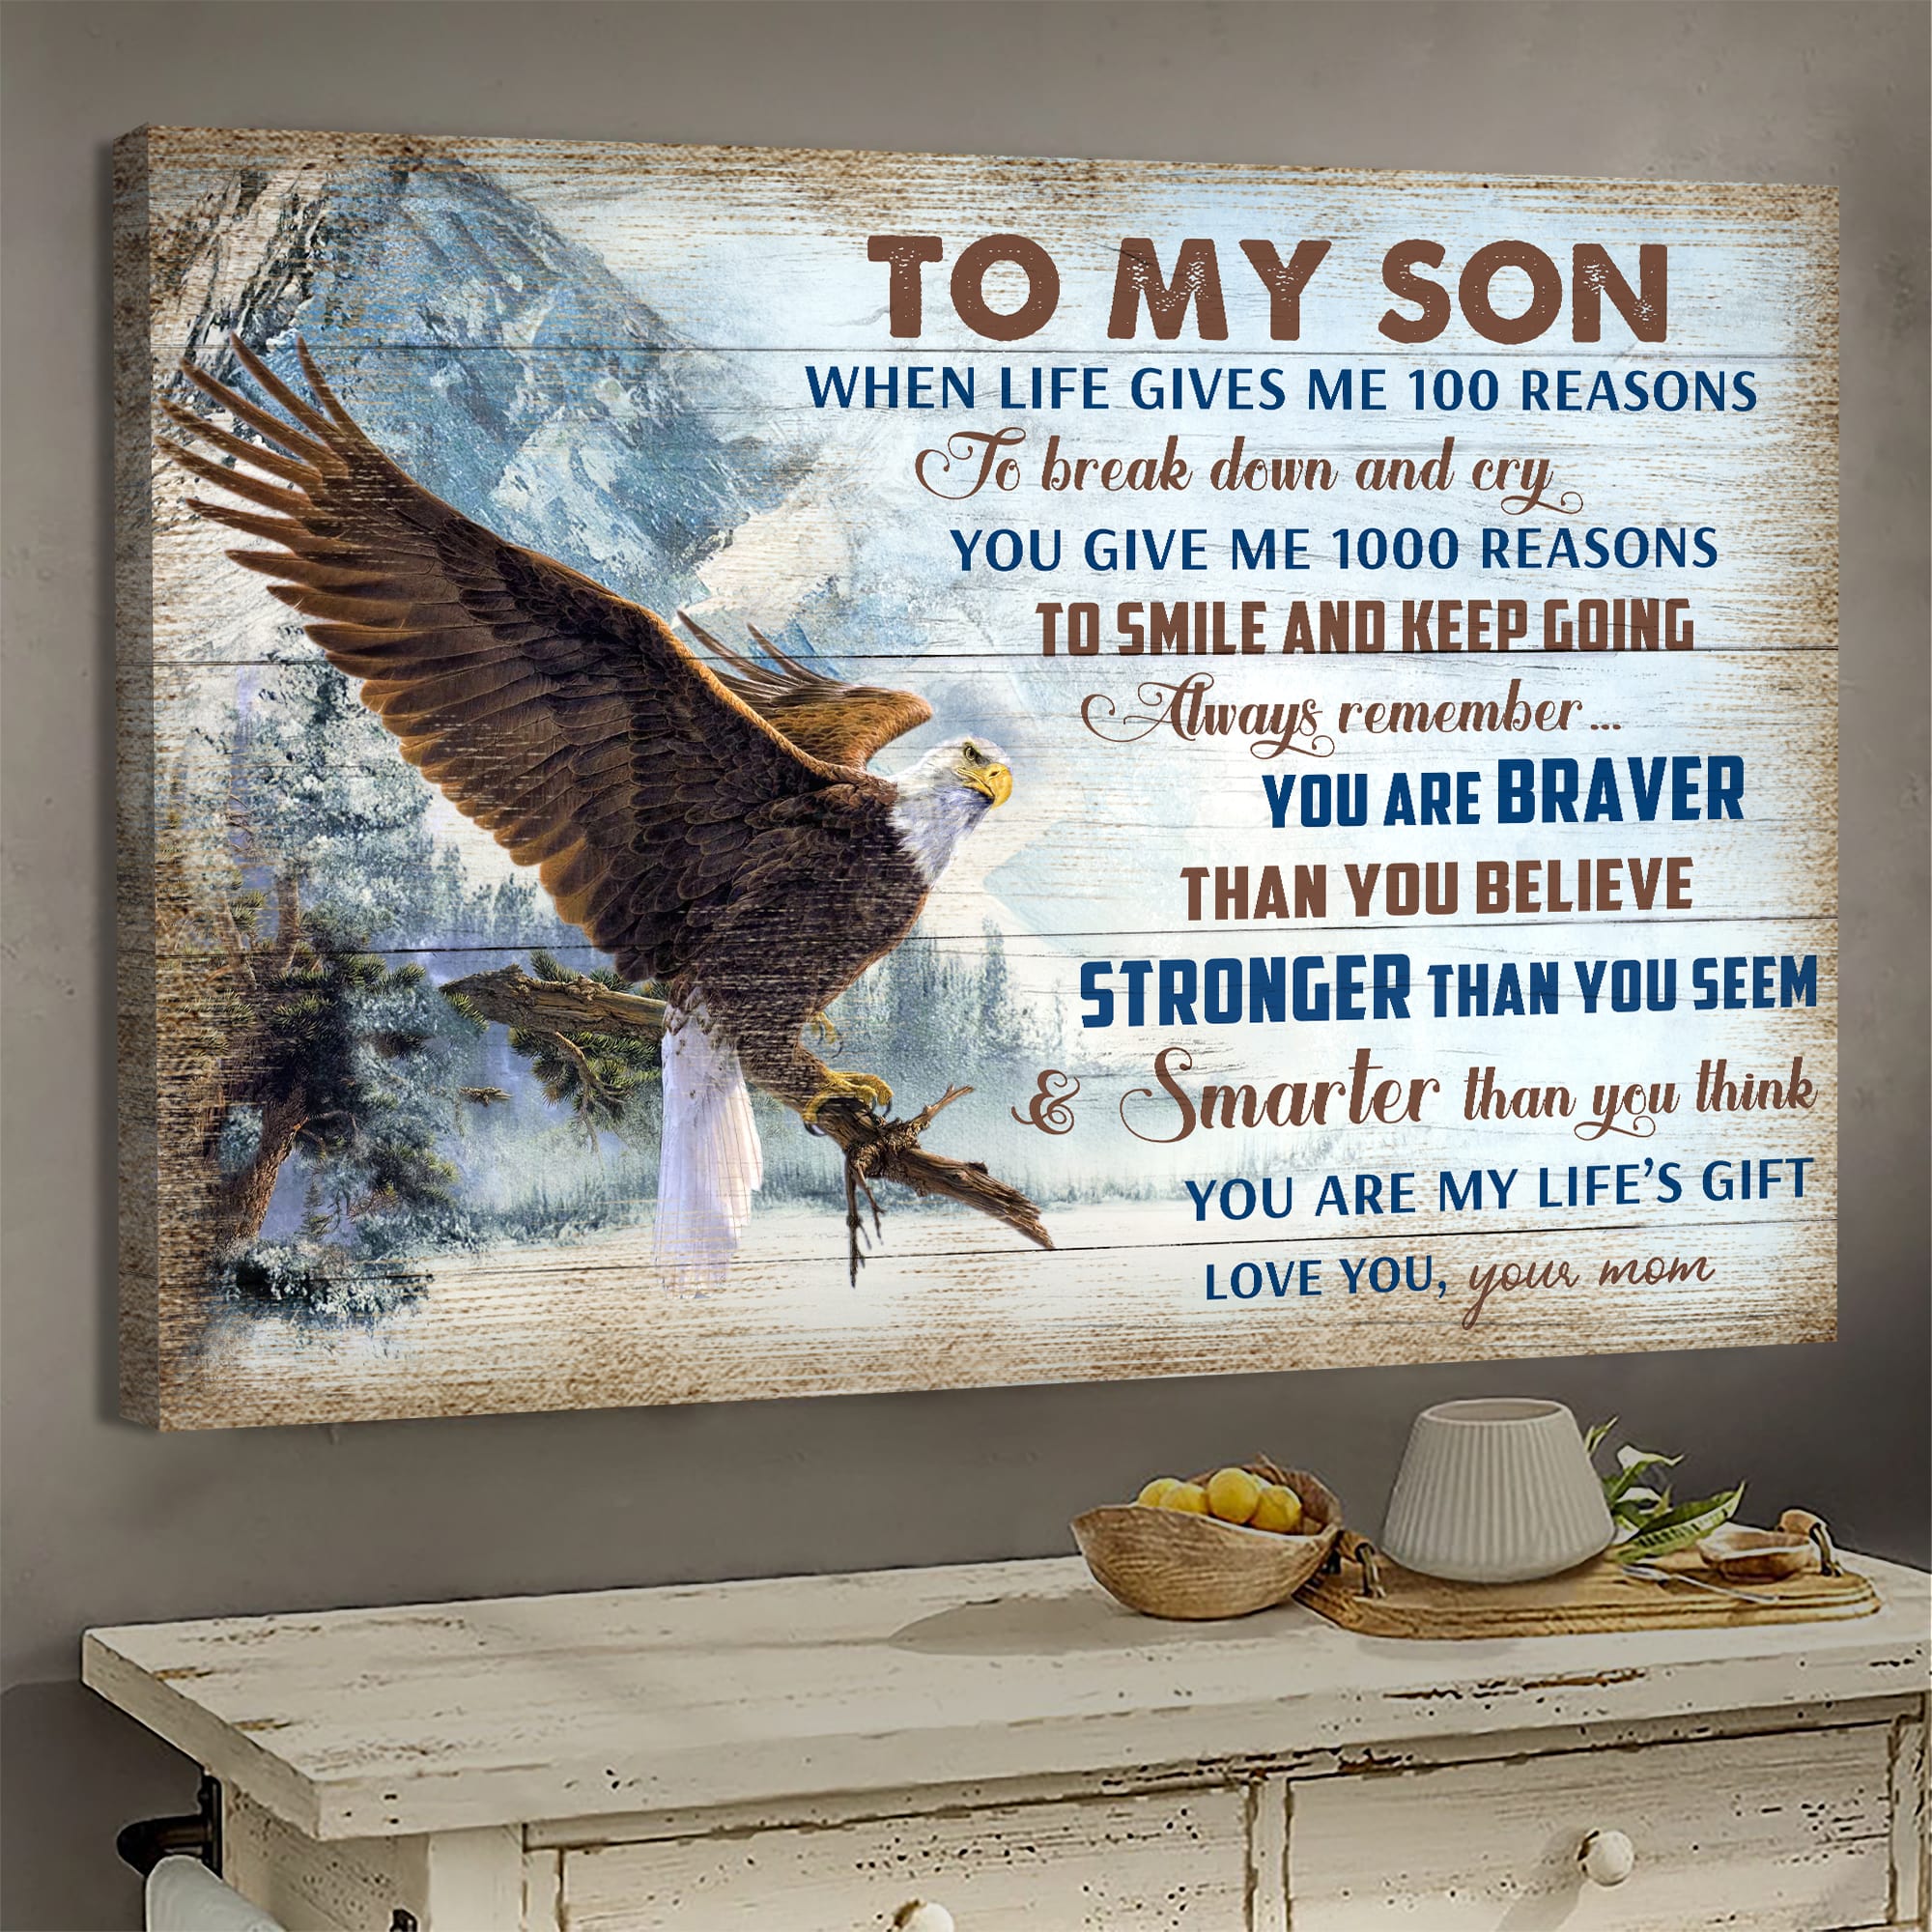 Mom to son, Eagle, Snow mountain, You are my life's gift - Family Landscape Canvas Prints, Wall Art